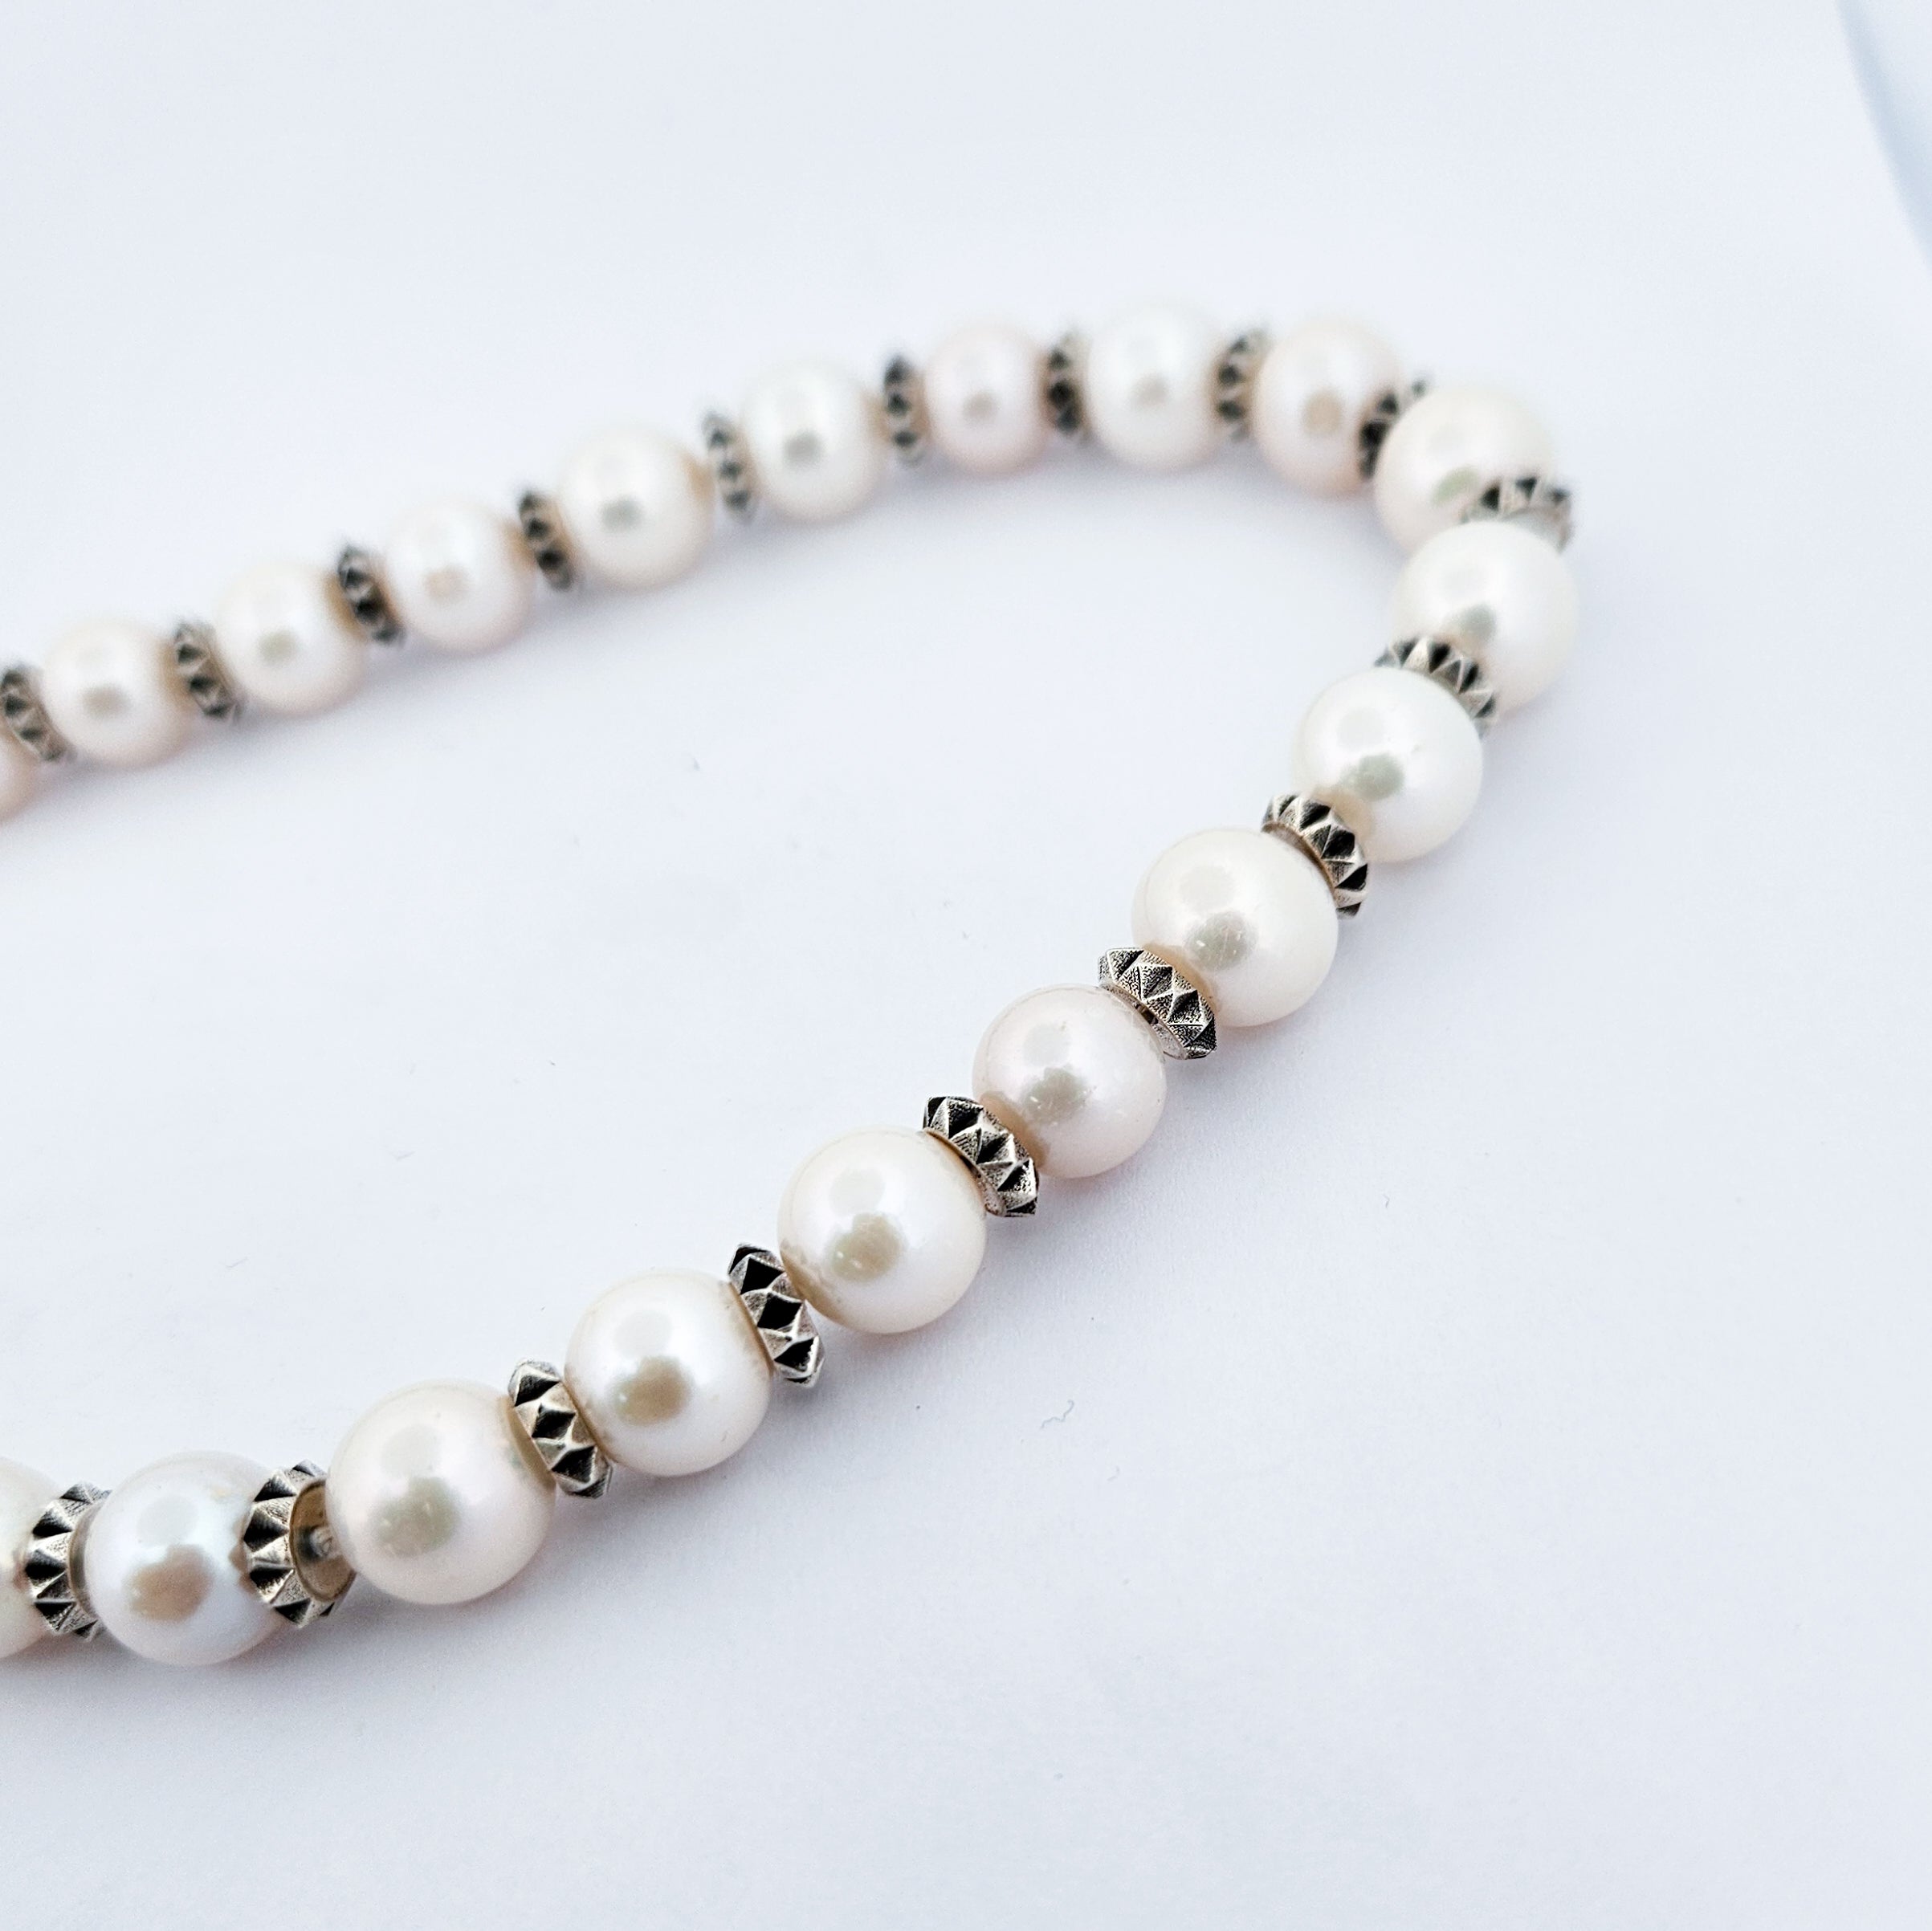 Studded Fresh Water Pearl Chocker Necklace - 15 Inches